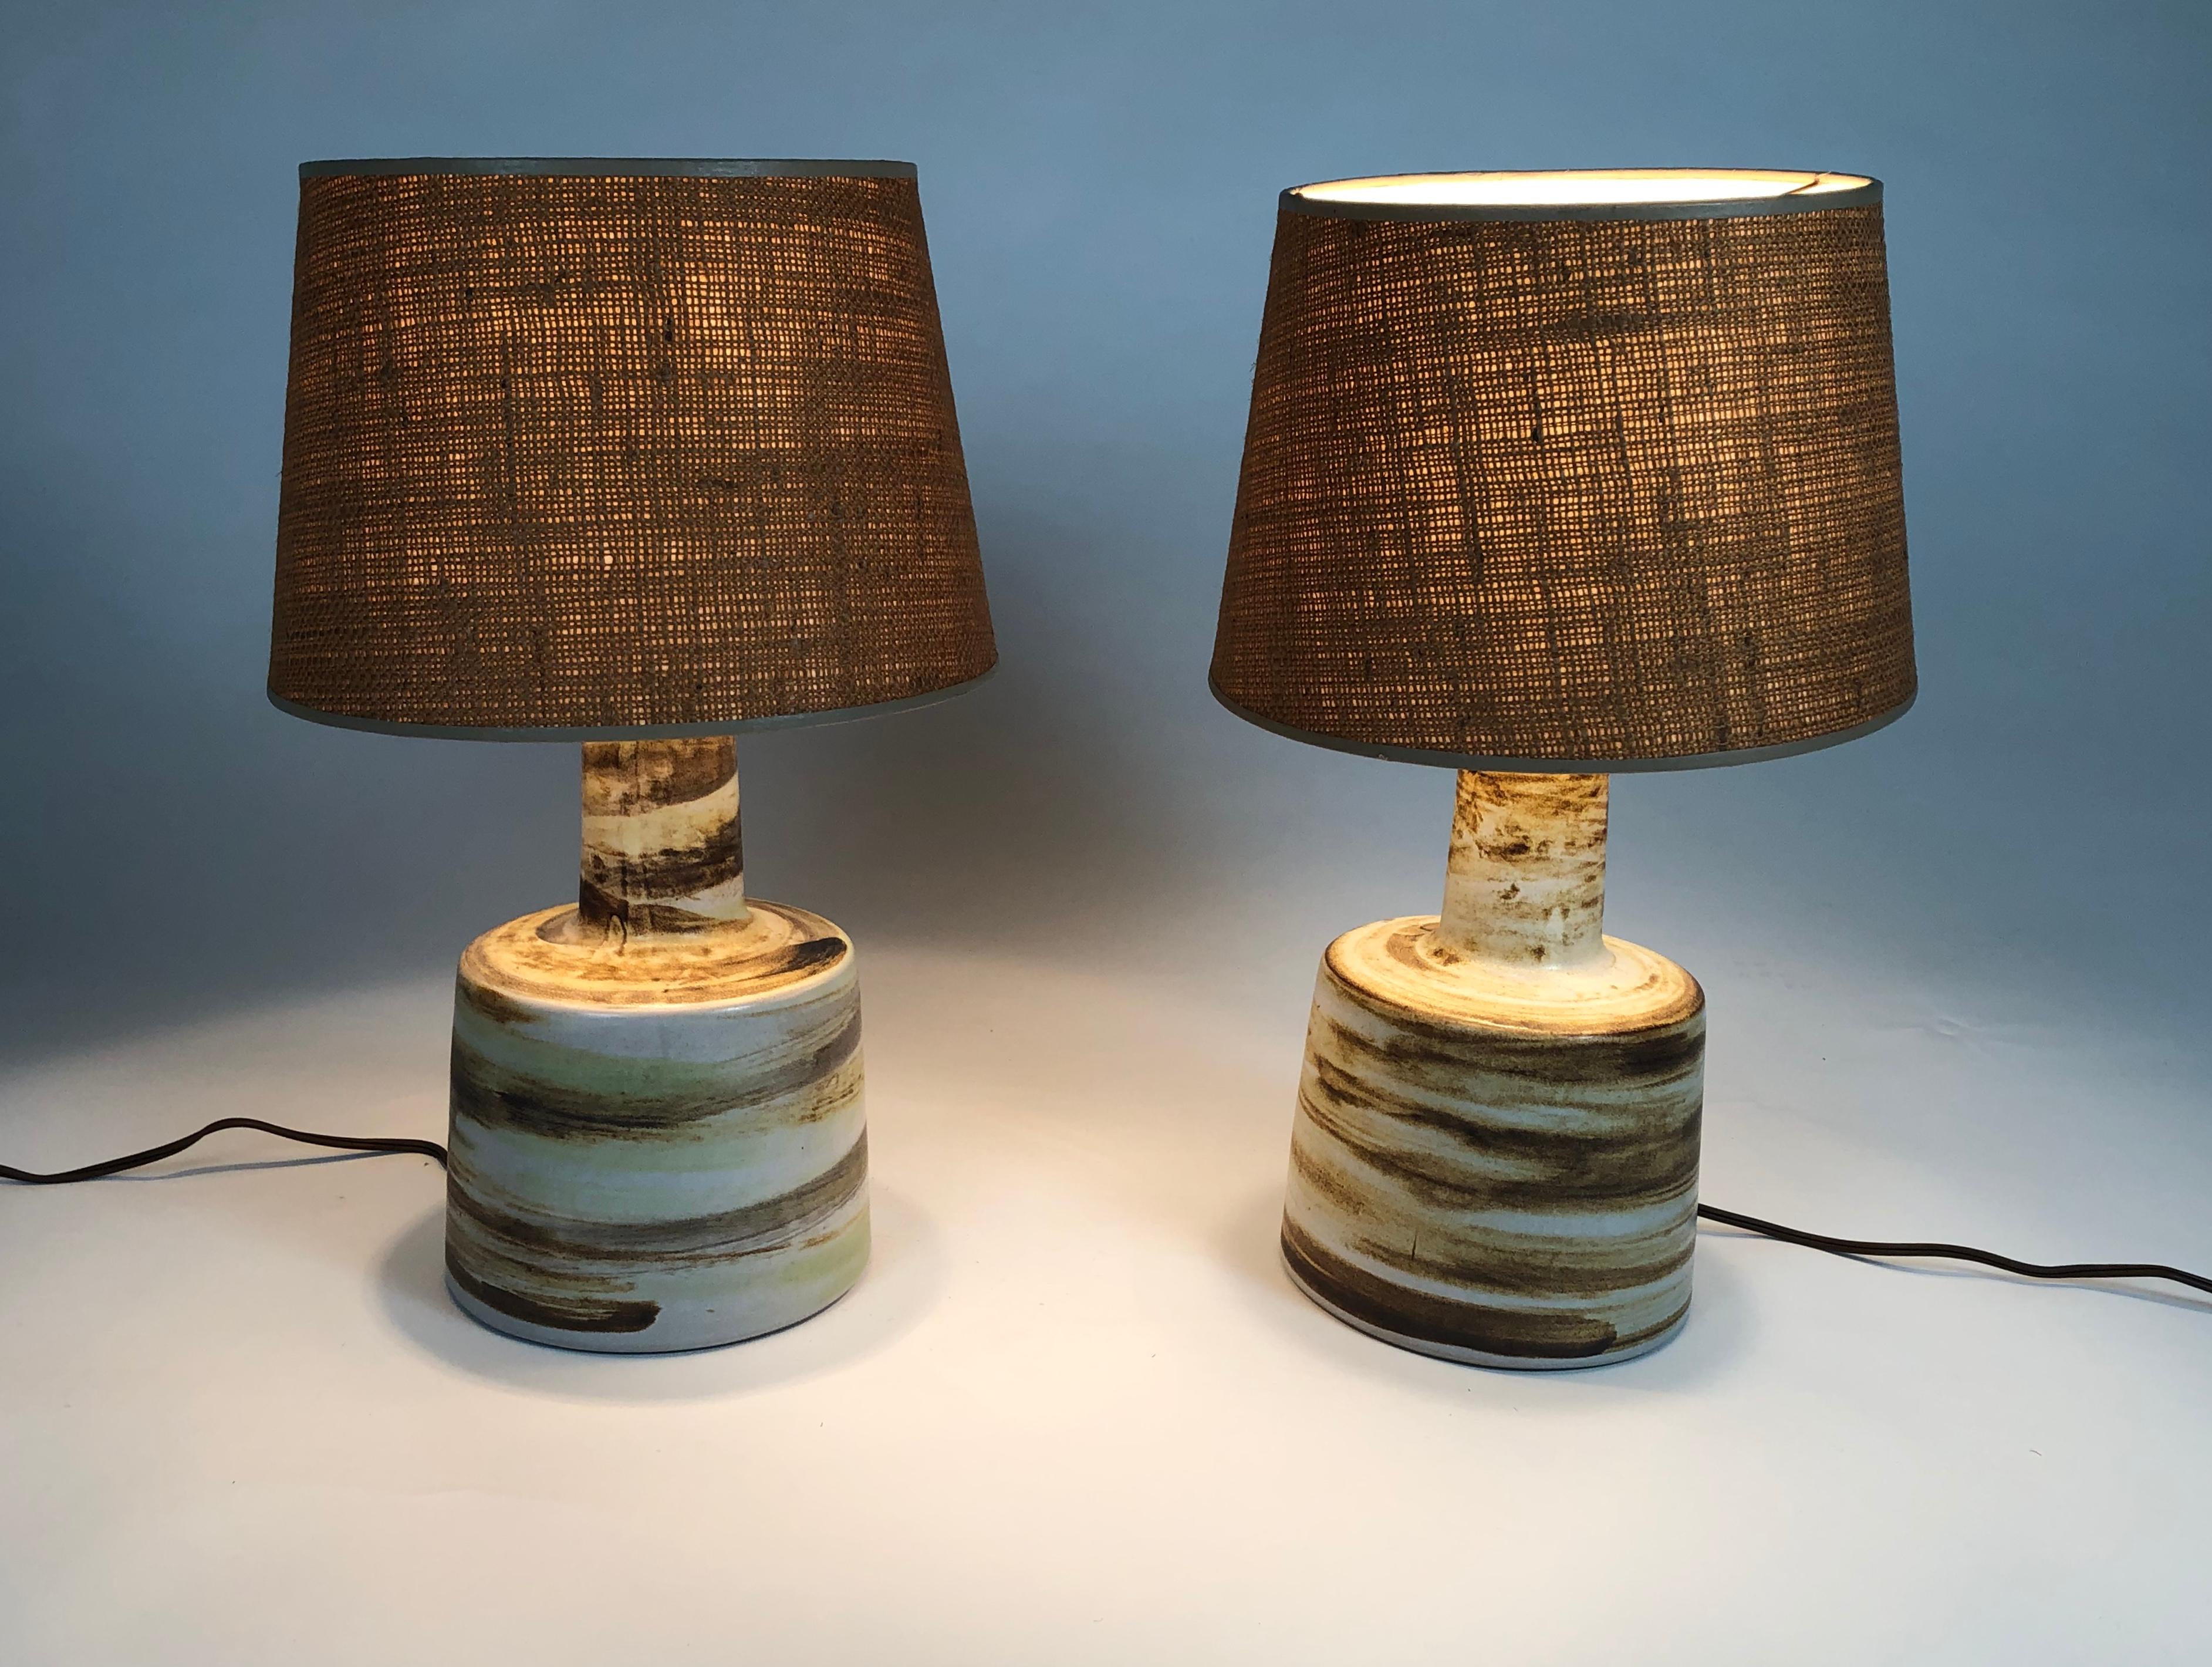 A pair of Jane and Gordon Martz art pottery lamps, each of stepped cylindrical form with a larger flared circular base and narrower neck on top, in white glazed ceramic, hand decorated with loosely applied brushwork in shades of brown, grey, tan